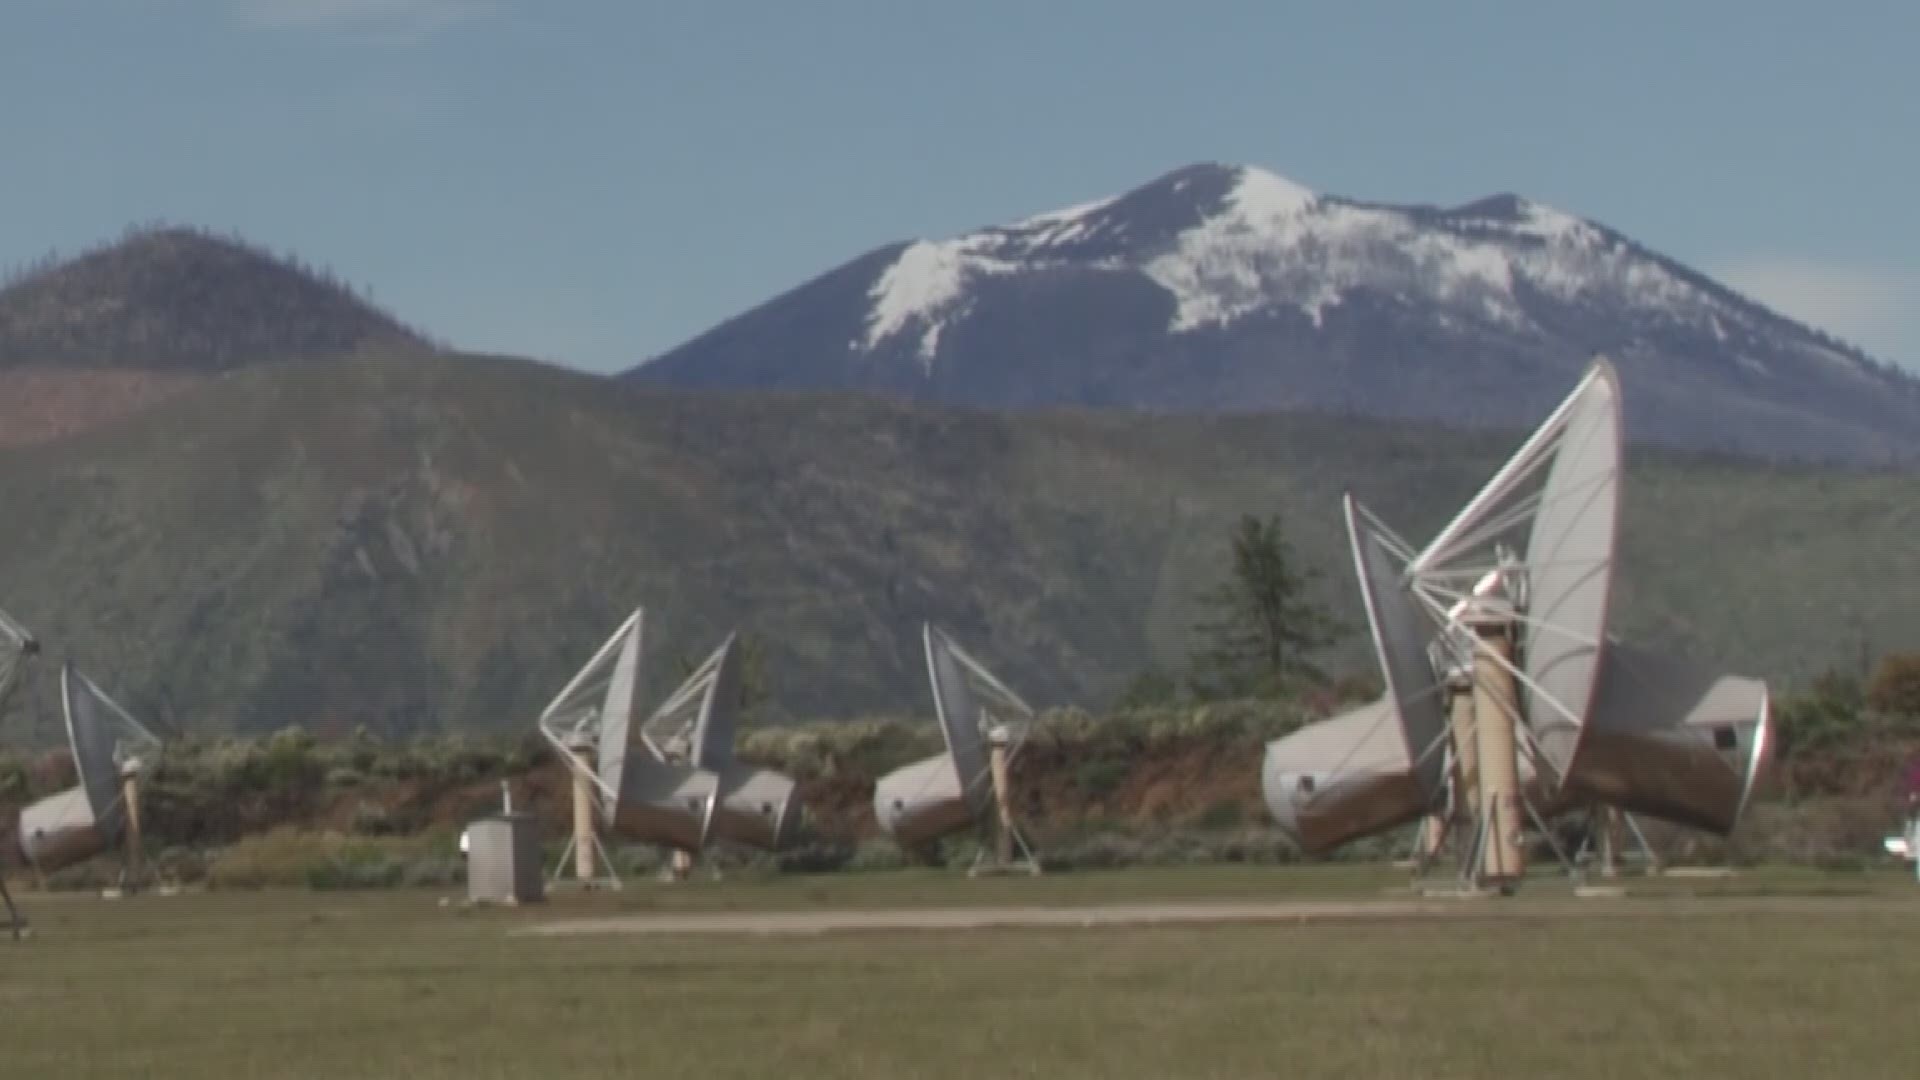 Scientists at SETI are scanning the skies for aliens in Lassen County, CA.